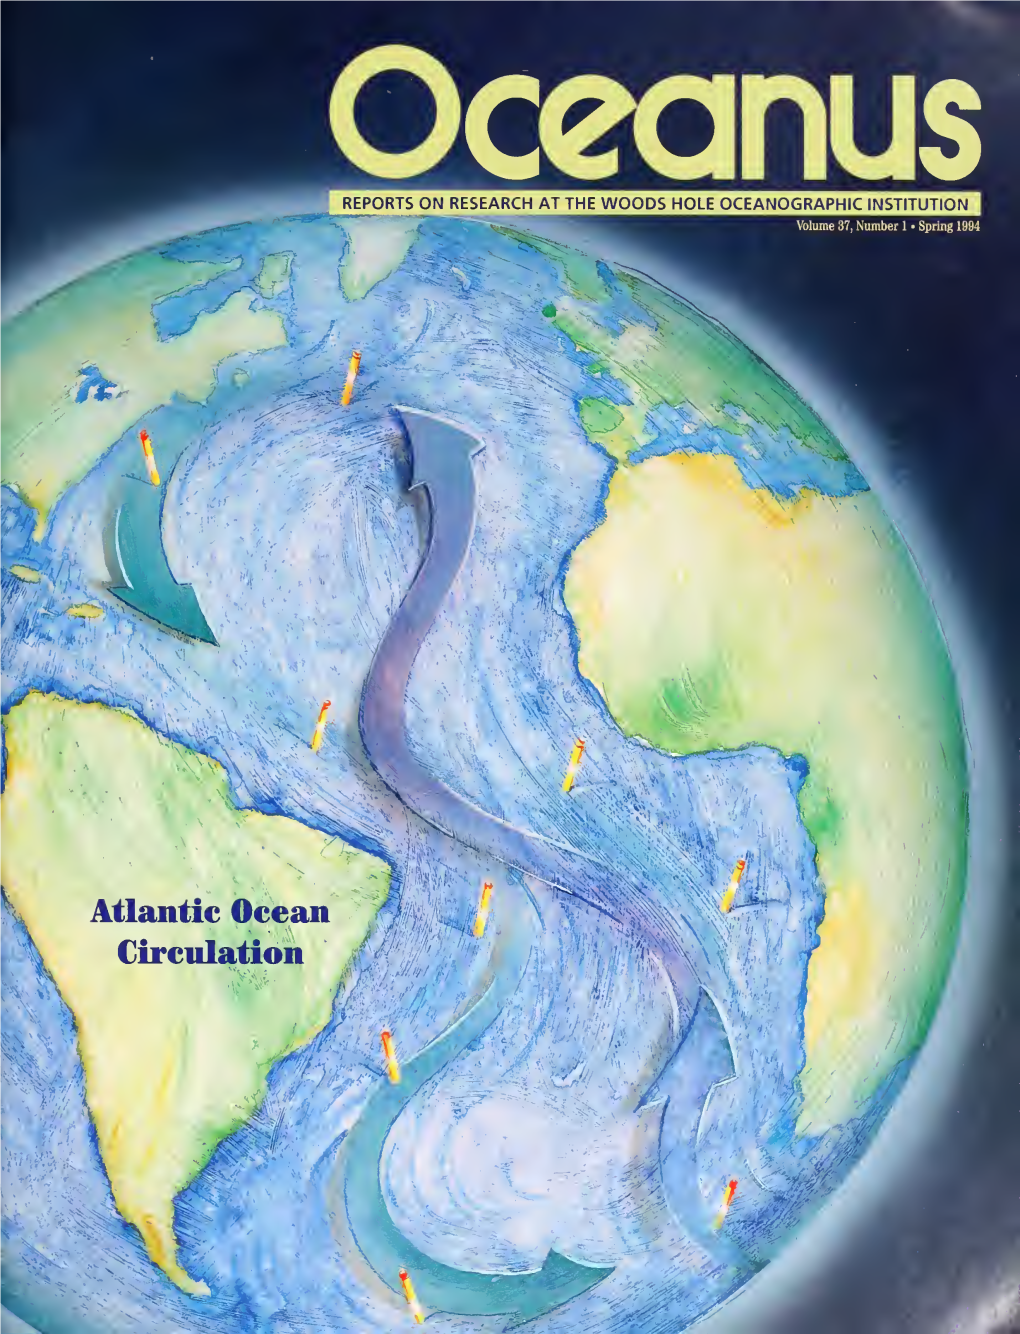 Circulation Oceanus REPORTS on RESEARCH at the WOODS HOLE OCEANOGRAPHIC INSTITUTION